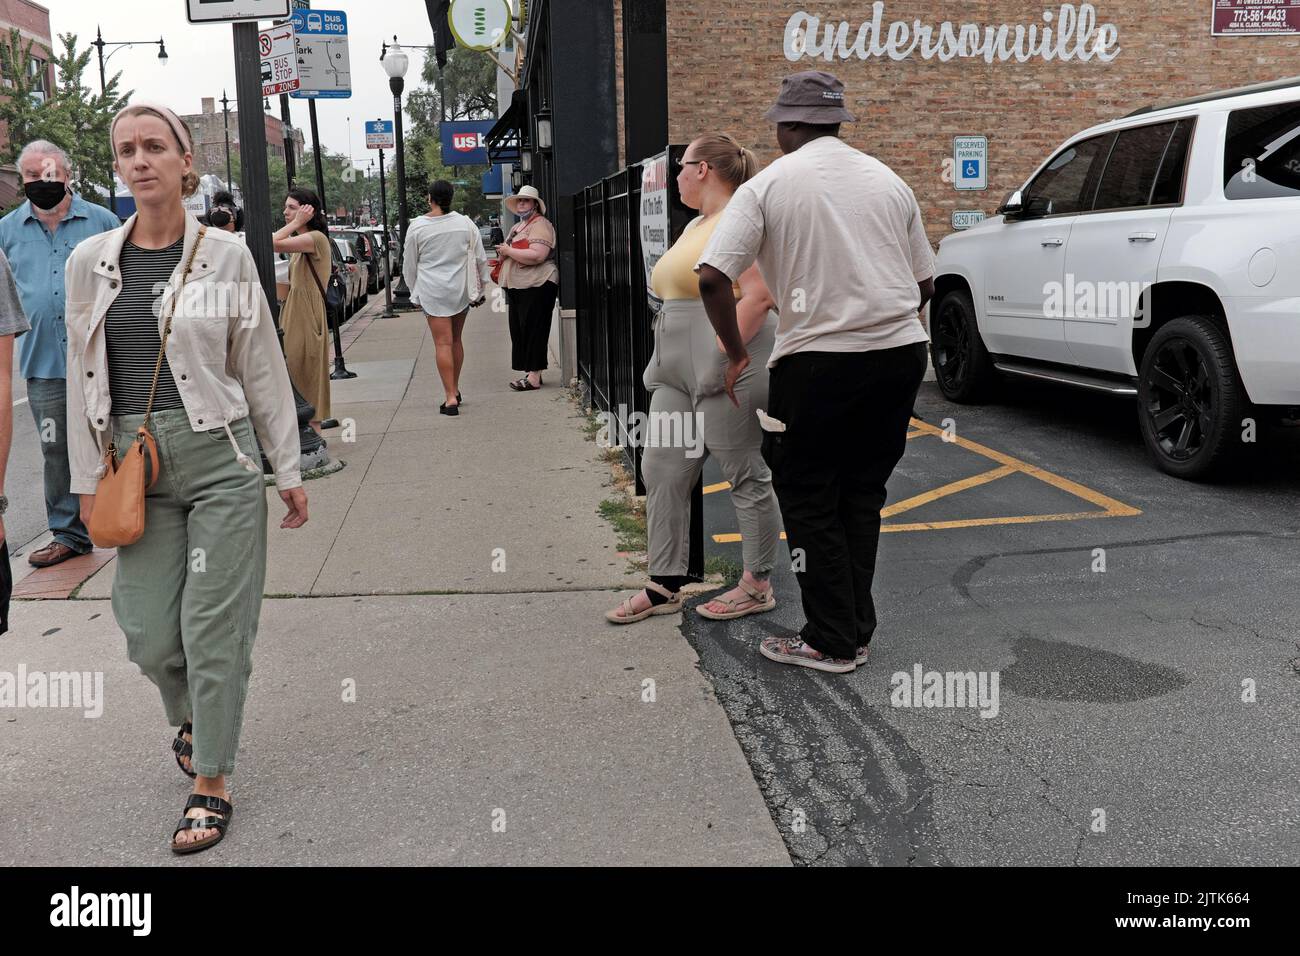 People on the sidewalks of Andersonville, Chicago, Illinois, create a lively streetscape. Stock Photo